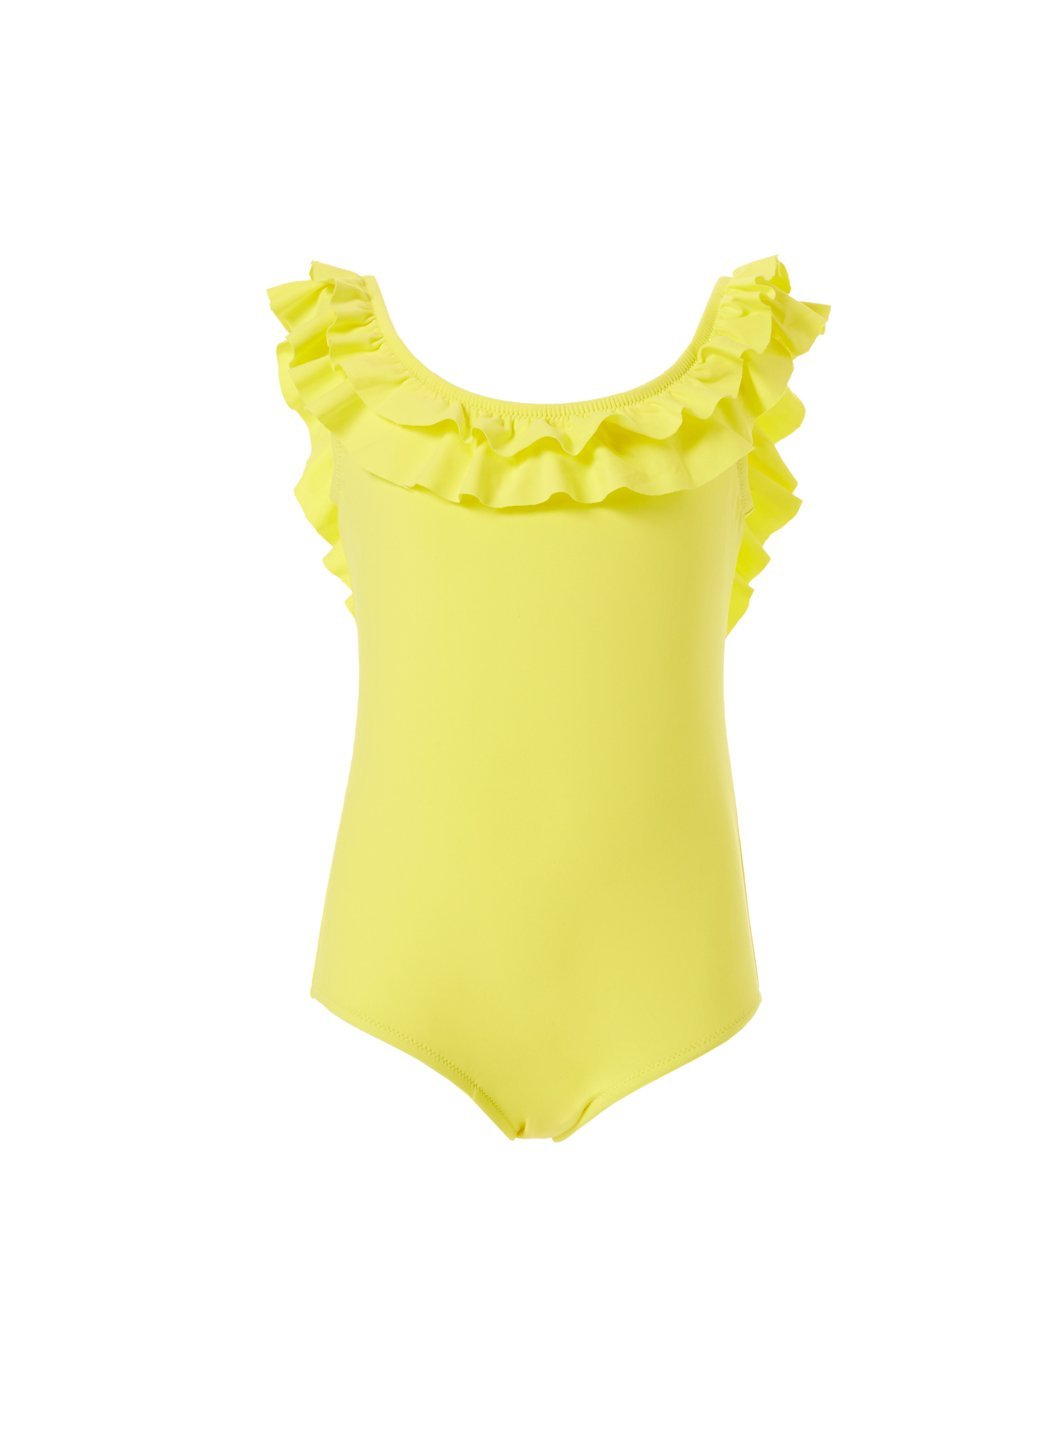 baby missy yellow over the shoulder frill onepiece swimsuit 2019